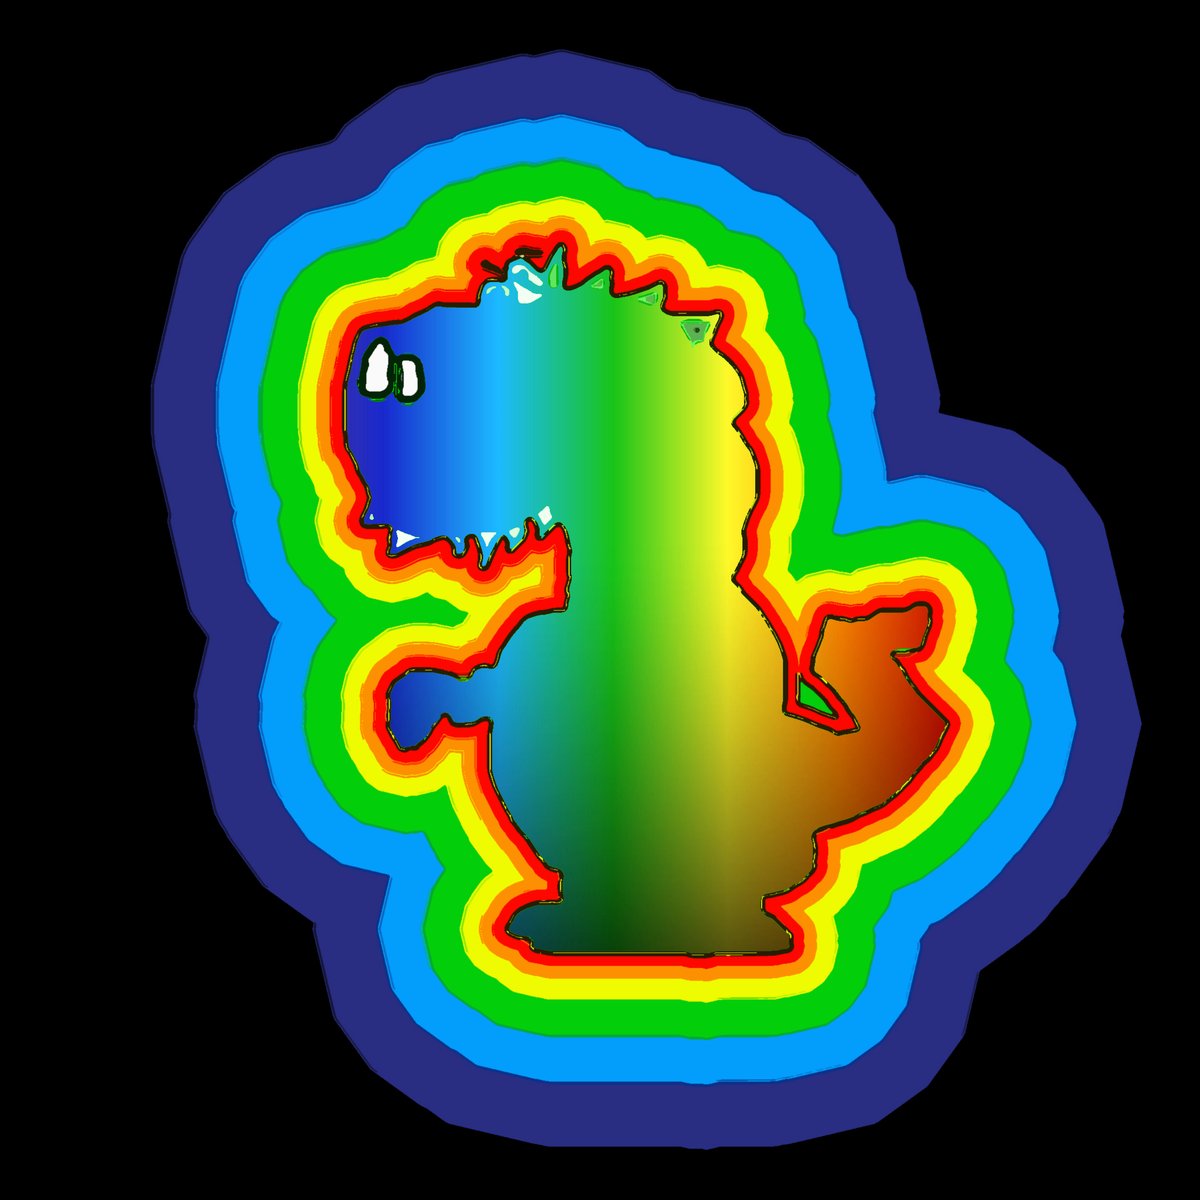 Today at 4:20 PM PST if you have sent 2 green seeds to seedvault.tez you will be issued a Rainbow Rex! 
On Monday July 11th at 4:20 PM PST everyone with one in their wallet will have be eligible to win the 1/1 Rex Seed piece (my only 1/1). 
There may be some surprise twist....